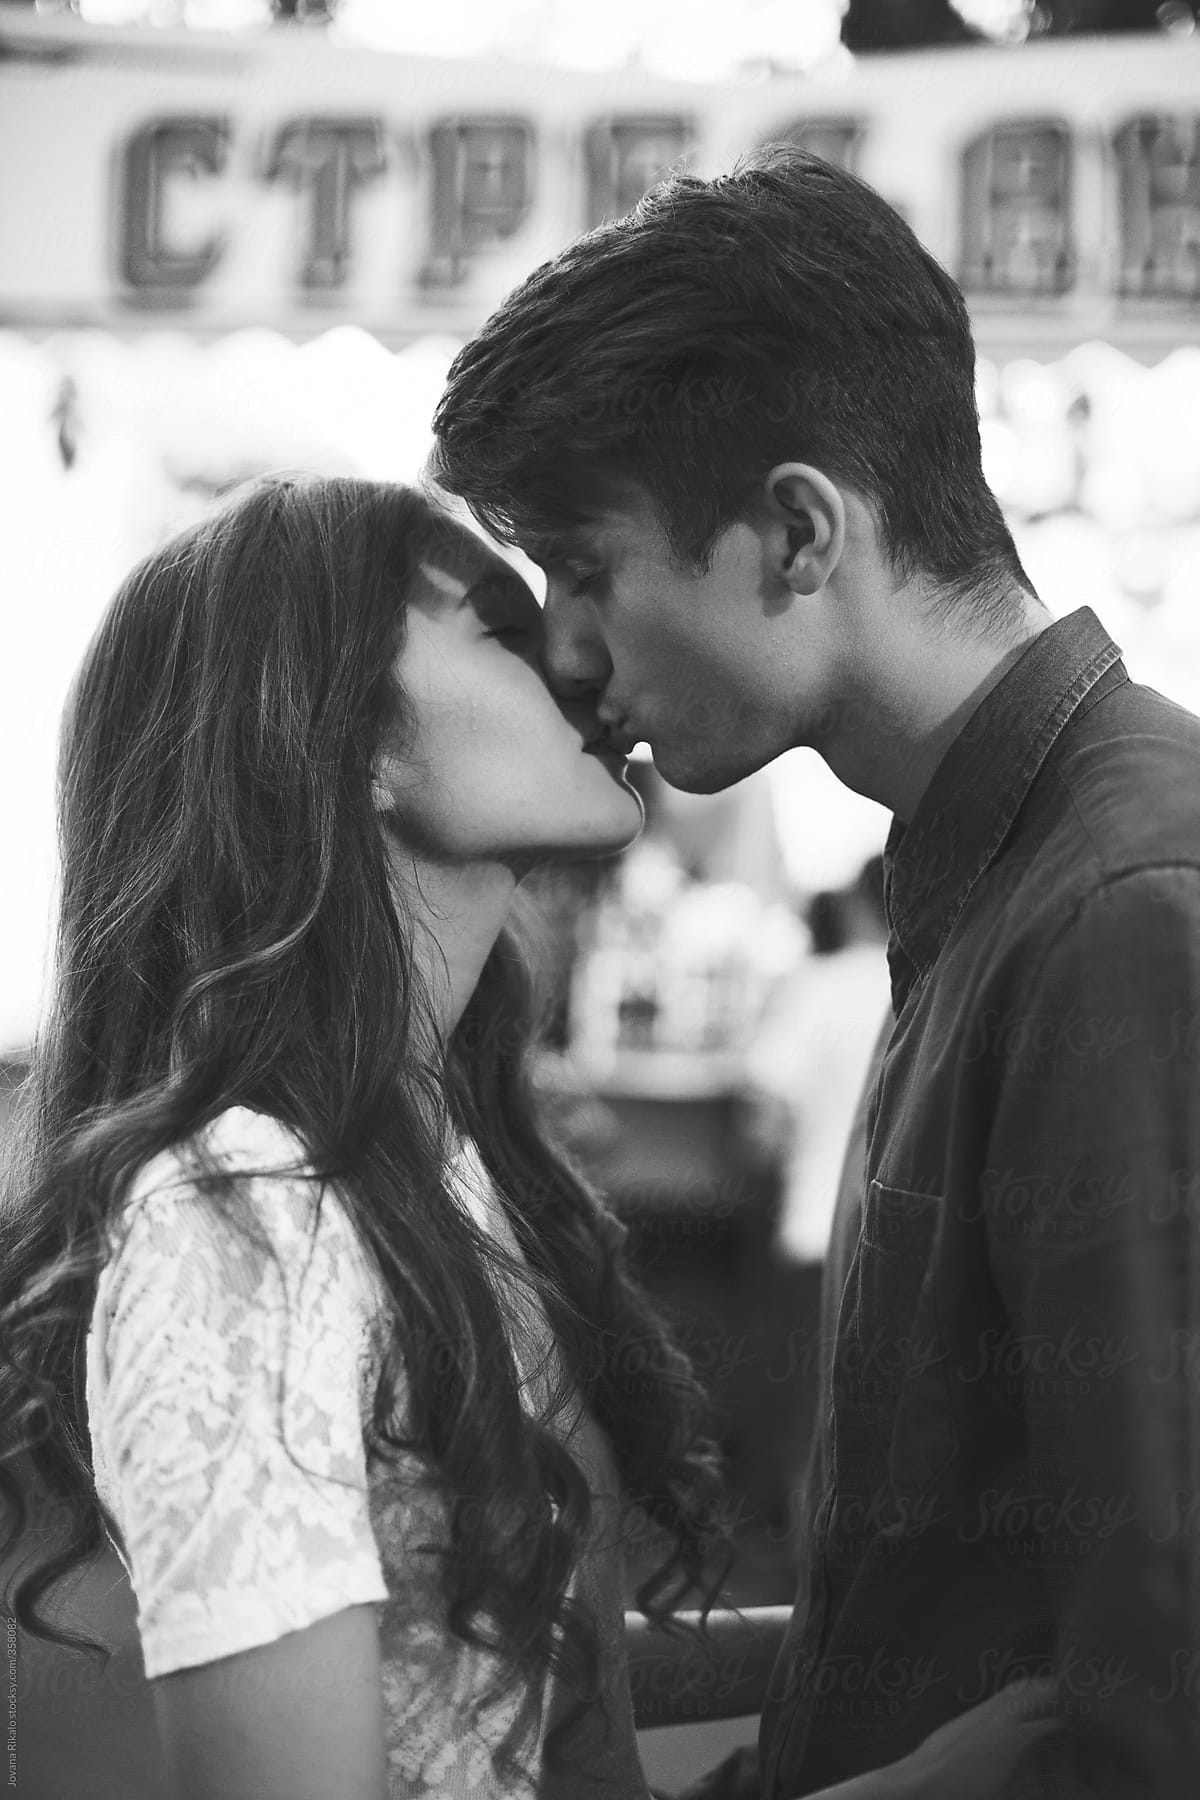 Young couple kissing at the carnival